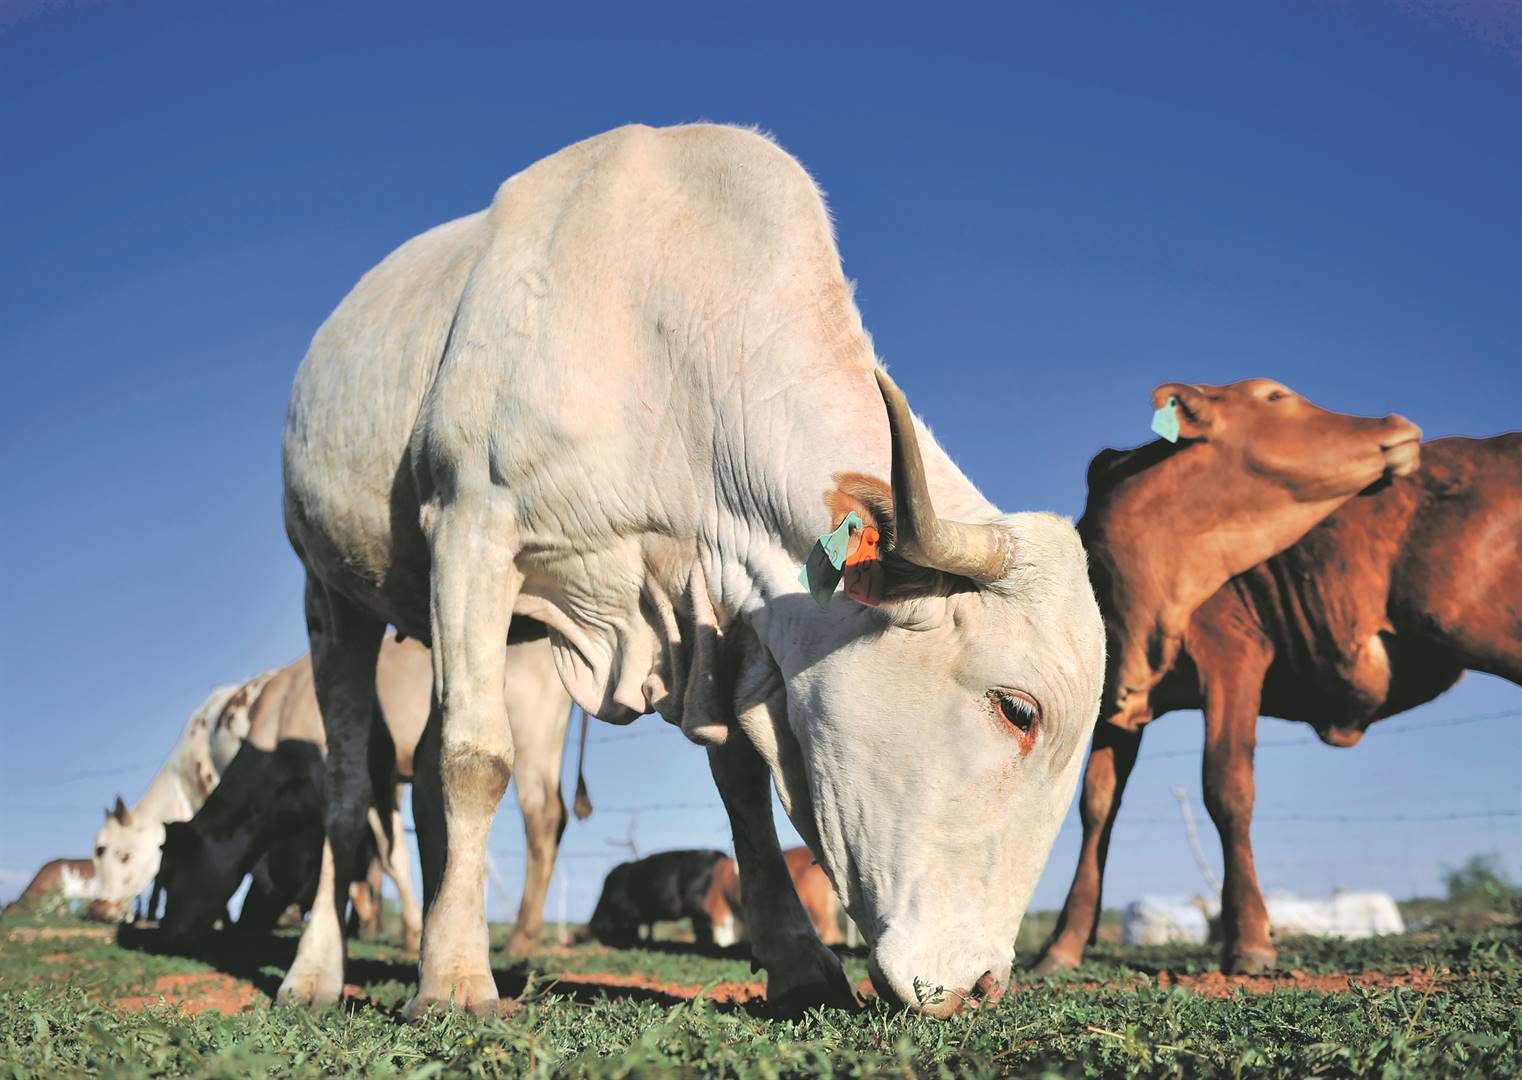  Cattle graze in open fields in Tsetse village outside Mahikeng, North West.In an effort to curtail the spread of foot-and-mouth disease in cattle, the agriculture department has vaccinated herds to establish a band of resistant animals around the known positive dip tanks. Photo: tebogo letsie